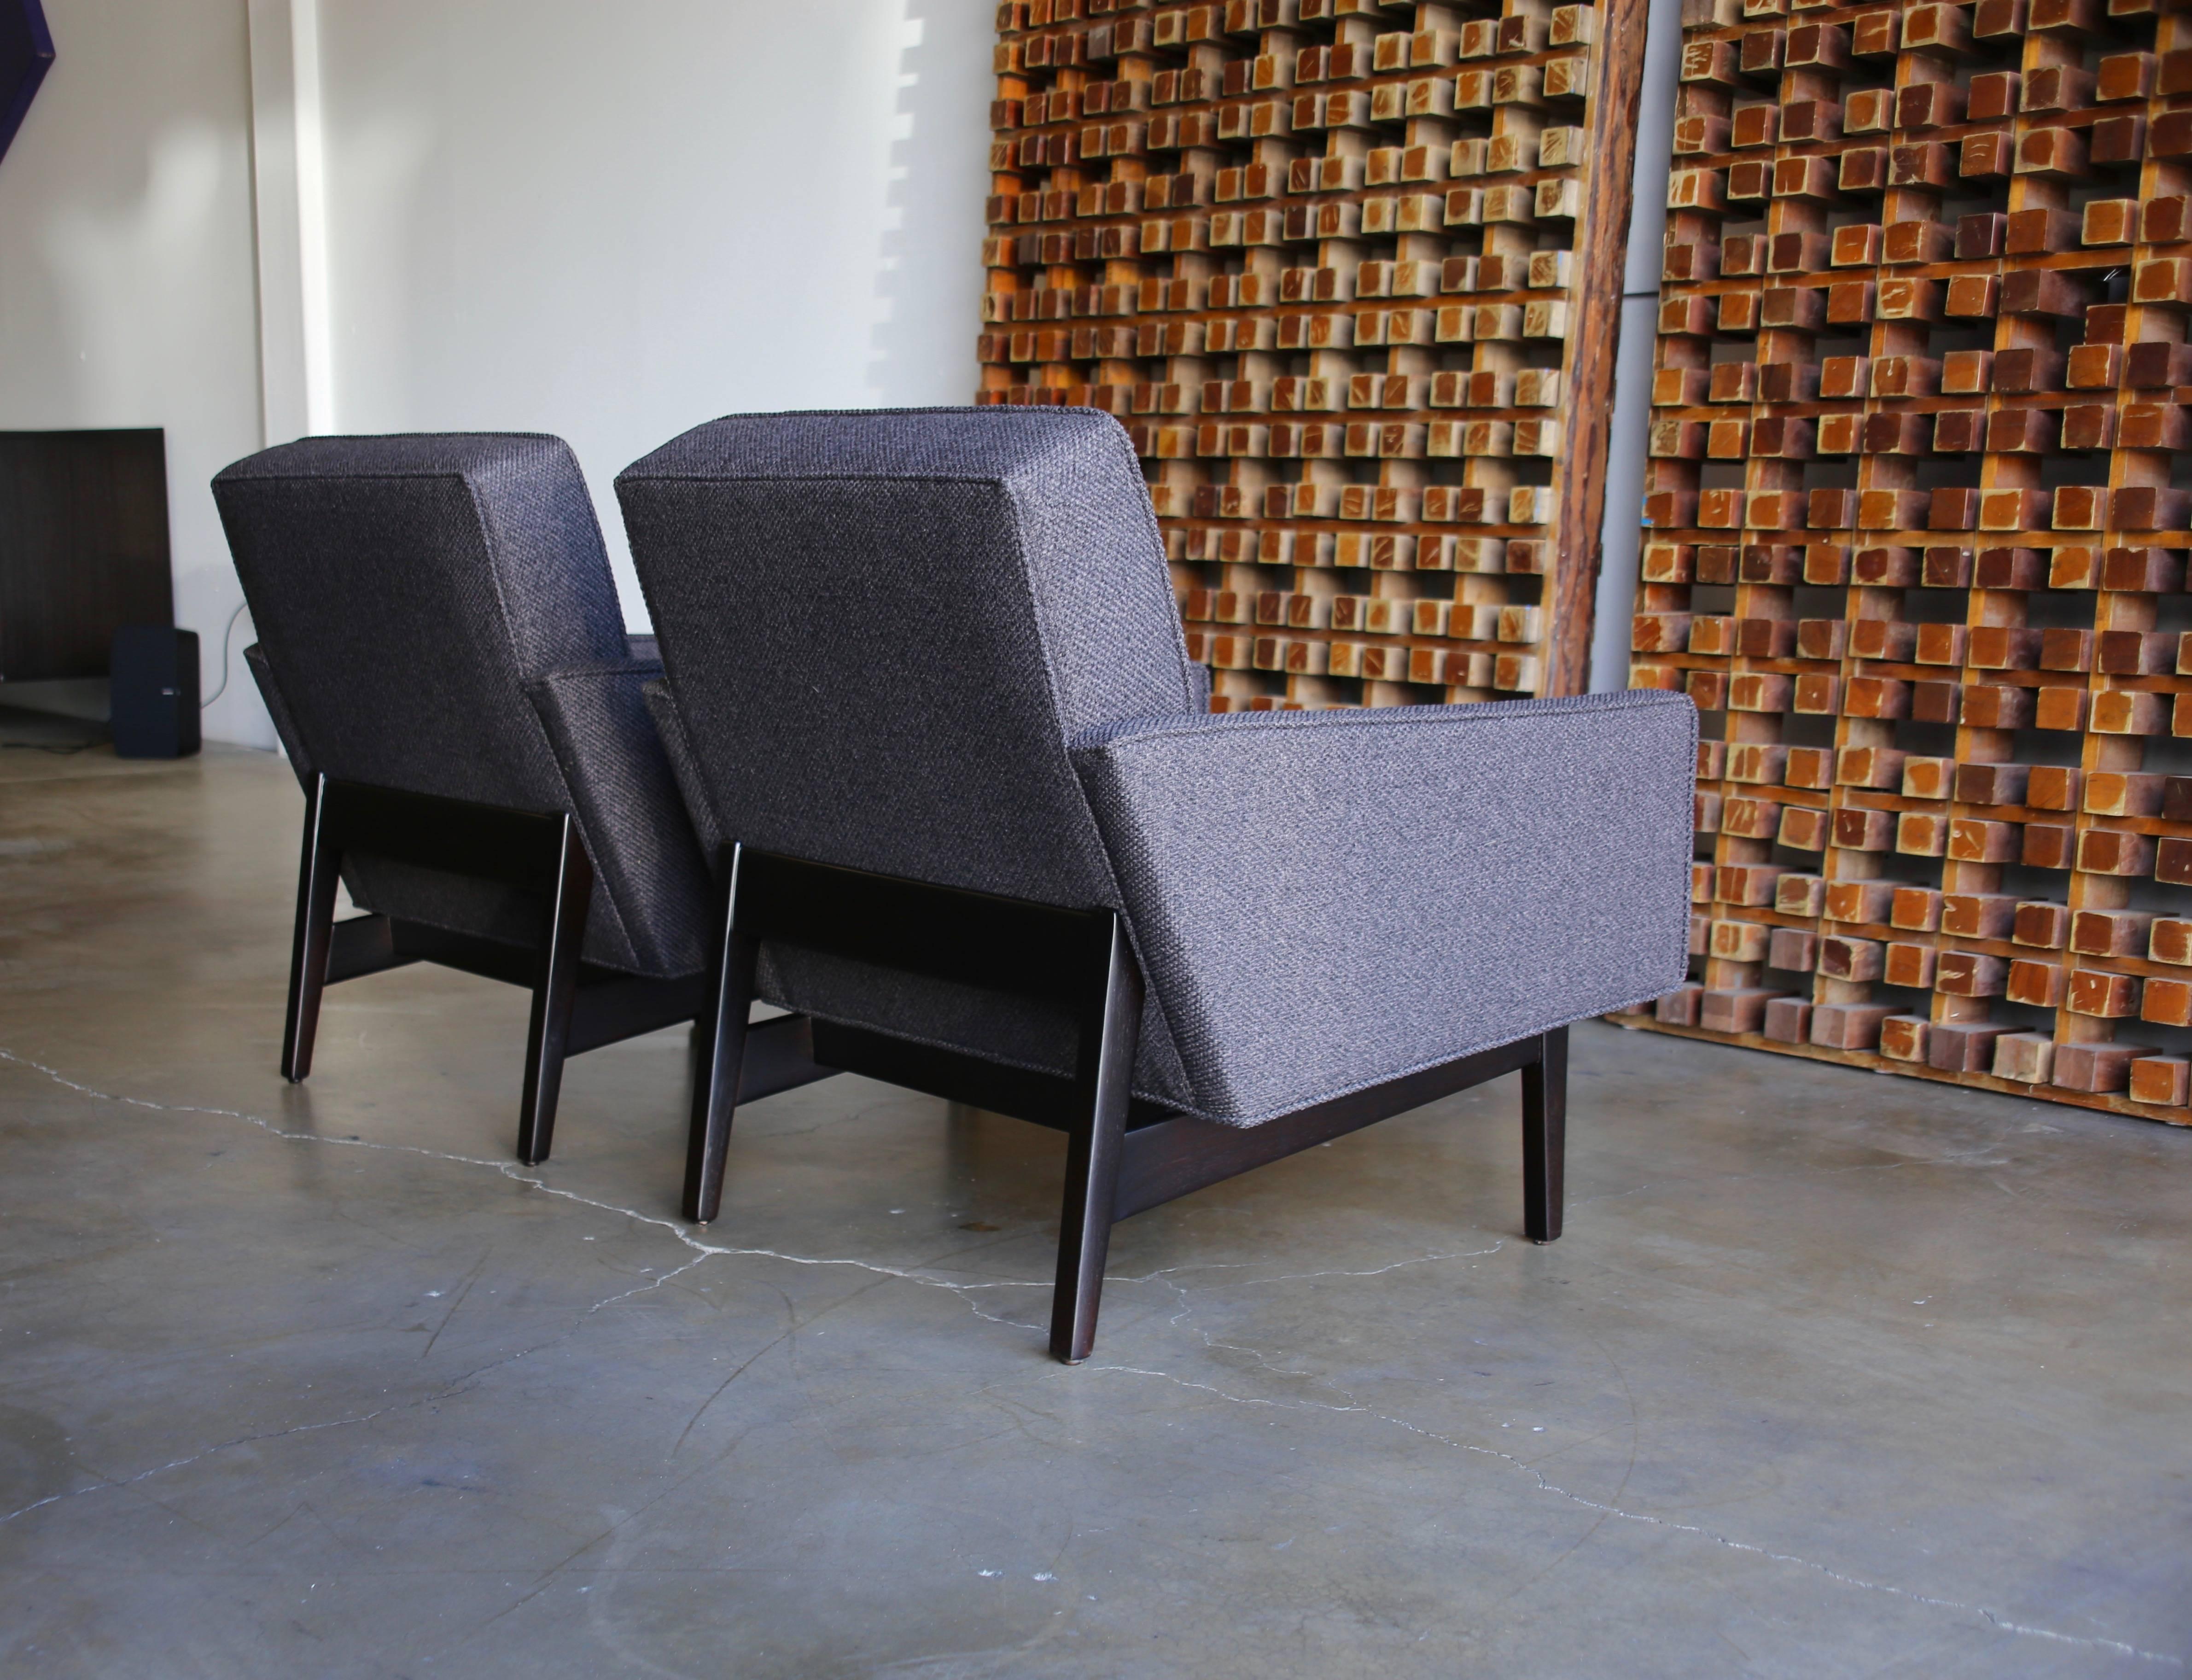 Pair of lounge chairs by Jens Risom.